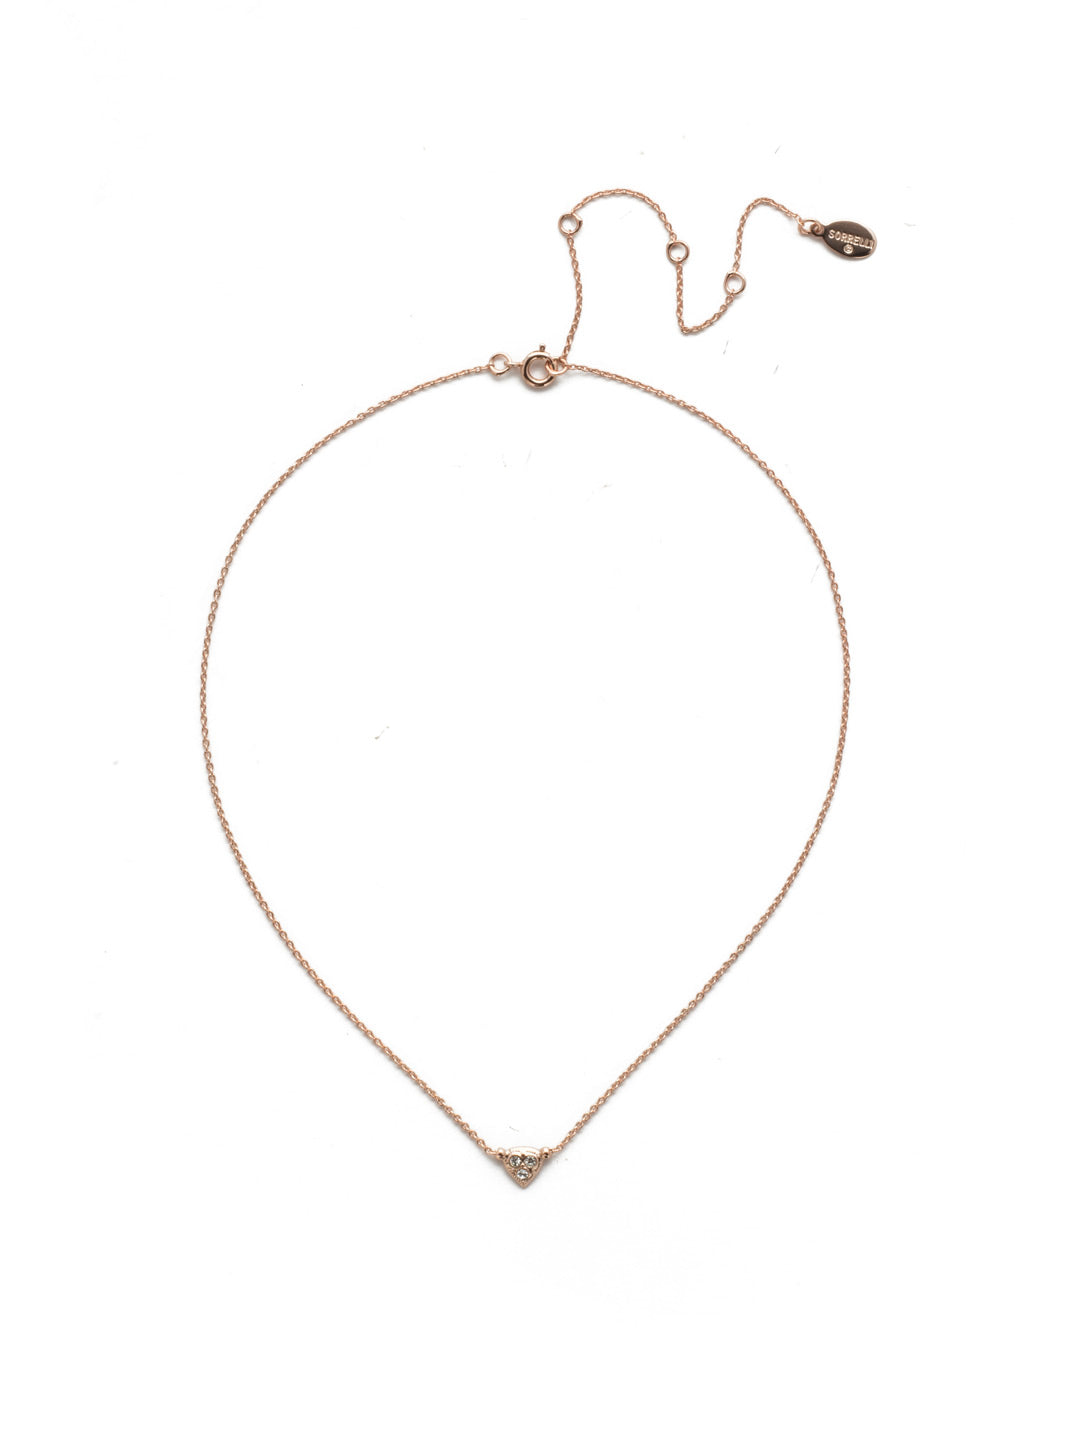 Suki Pendant Necklace - NEM7RGCRY - <p>Three simple crystal gems give off just enough sparkle to enhance any outfit. Make this necklace a wardrobe staple. From Sorrelli's Crystal collection in our Rose Gold-tone finish.</p>